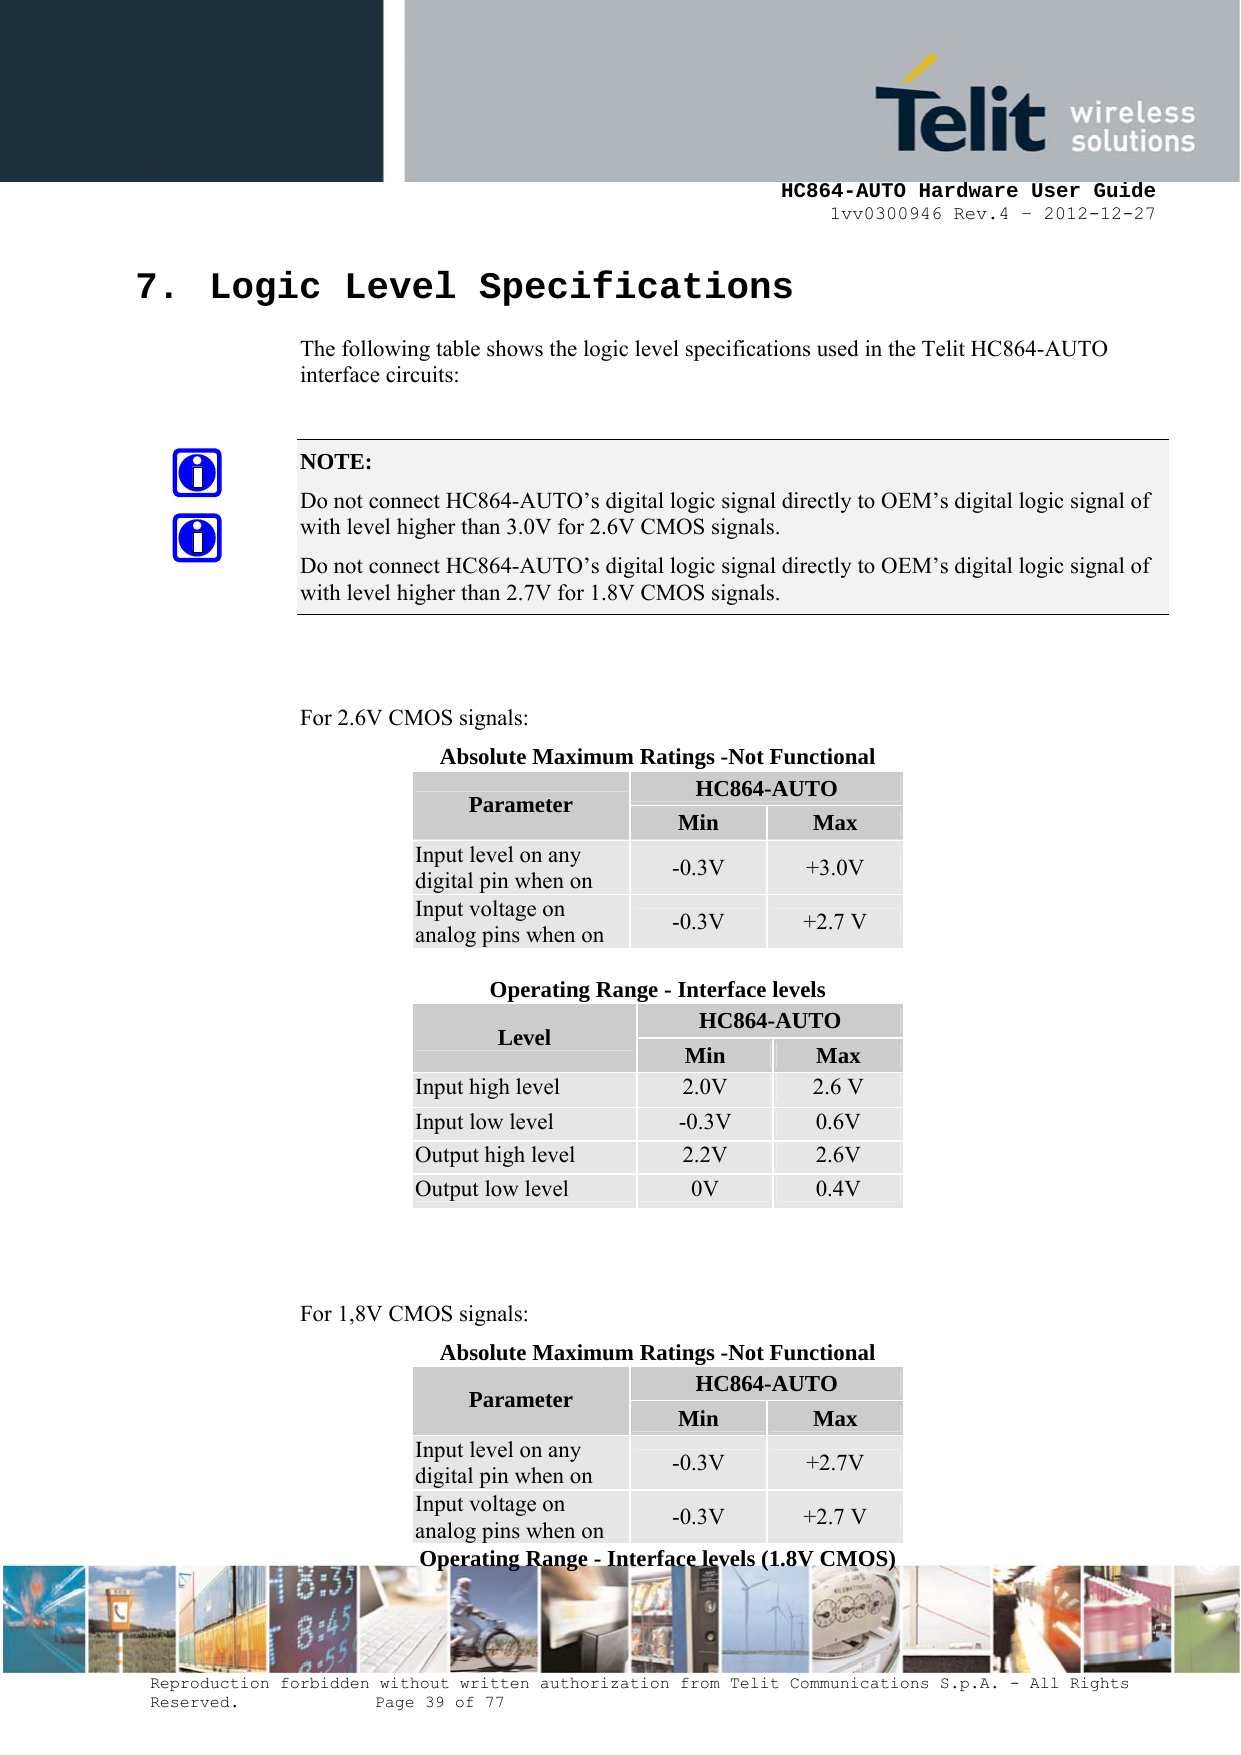     HC864-AUTO Hardware User Guide 1vv0300946 Rev.4 – 2012-12-27 Reproduction forbidden without written authorization from Telit Communications S.p.A. - All Rights Reserved.    Page 39 of 77  7. Logic Level Specifications The following table shows the logic level specifications used in the Telit HC864-AUTO interface circuits:  NOTE:  Do not connect HC864-AUTO’s digital logic signal directly to OEM’s digital logic signal of with level higher than 3.0V for 2.6V CMOS signals. Do not connect HC864-AUTO’s digital logic signal directly to OEM’s digital logic signal of with level higher than 2.7V for 1.8V CMOS signals.   For 2.6V CMOS signals: Absolute Maximum Ratings -Not Functional HC864-AUTO Parameter  Min  Max Input level on any digital pin when on  -0.3V  +3.0V Input voltage on analog pins when on  -0.3V  +2.7 V  Operating Range - Interface levels HC864-AUTO Level  Min  Max Input high level  2.0V  2.6 V Input low level  -0.3V  0.6V Output high level  2.2V  2.6V Output low level  0V  0.4V   For 1,8V CMOS signals: Absolute Maximum Ratings -Not Functional HC864-AUTO Parameter  Min  Max Input level on any digital pin when on  -0.3V  +2.7V Input voltage on analog pins when on  -0.3V  +2.7 V Operating Range - Interface levels (1.8V CMOS) 